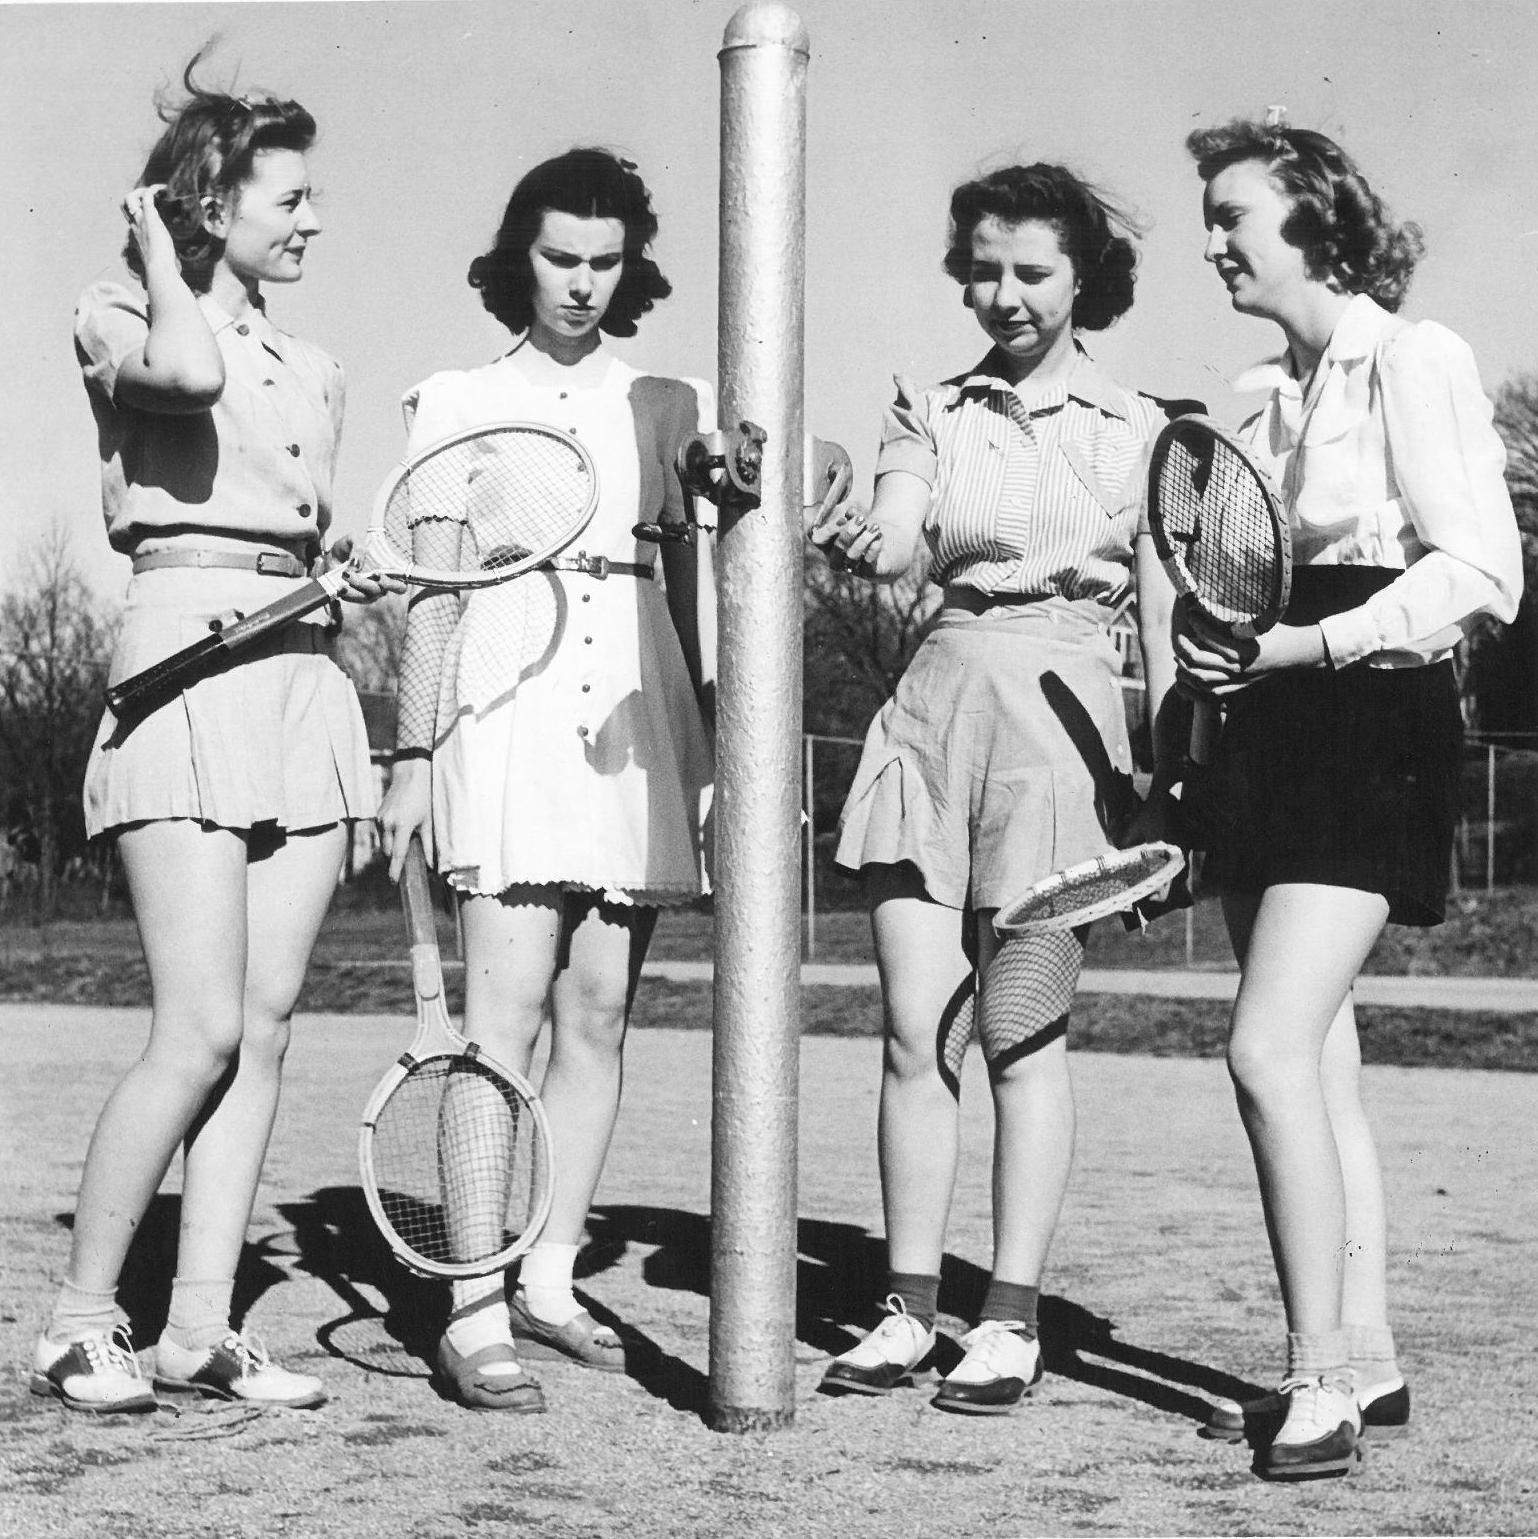 Photograph of four women with rackets preparing to play tennis or badminton, 1940s